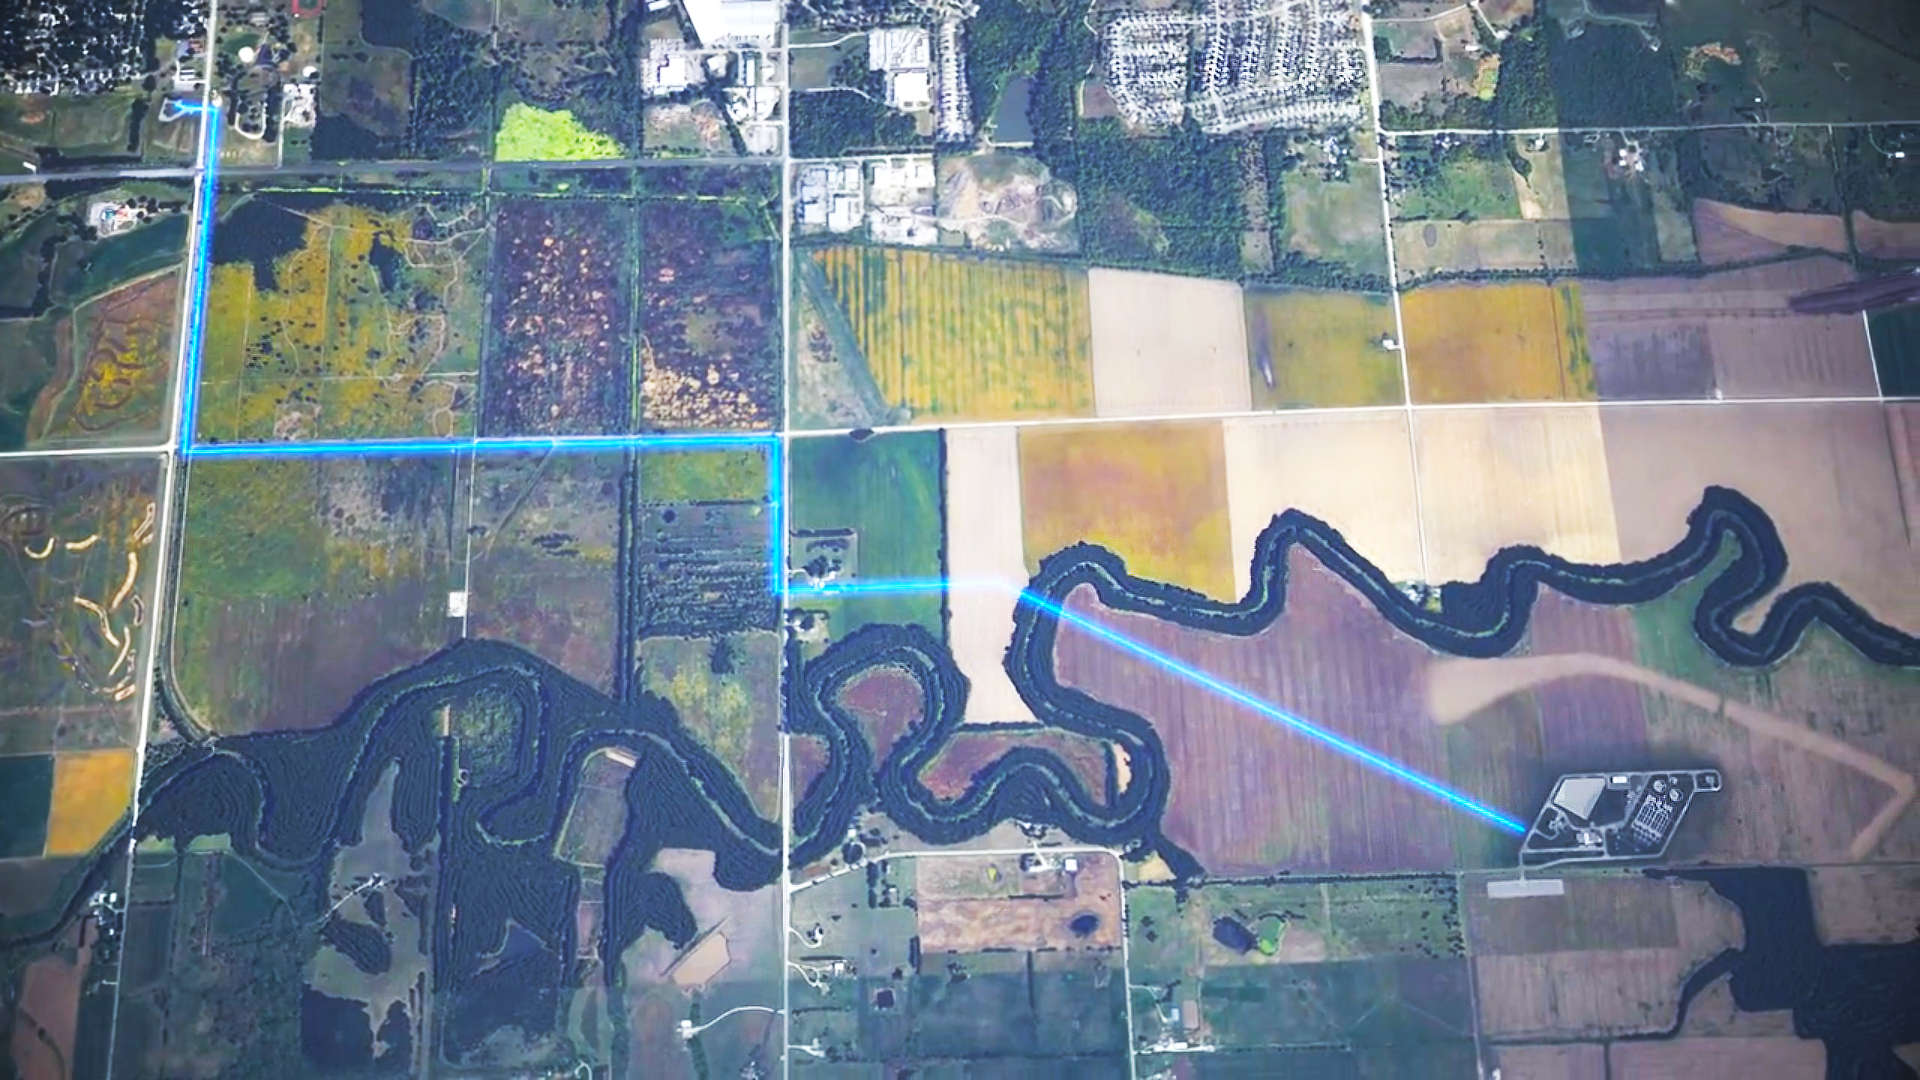 Extremely zoomed out aerial view of both the wastewater plant and pump station. A blue line runs along the roads showing the path that it takes.